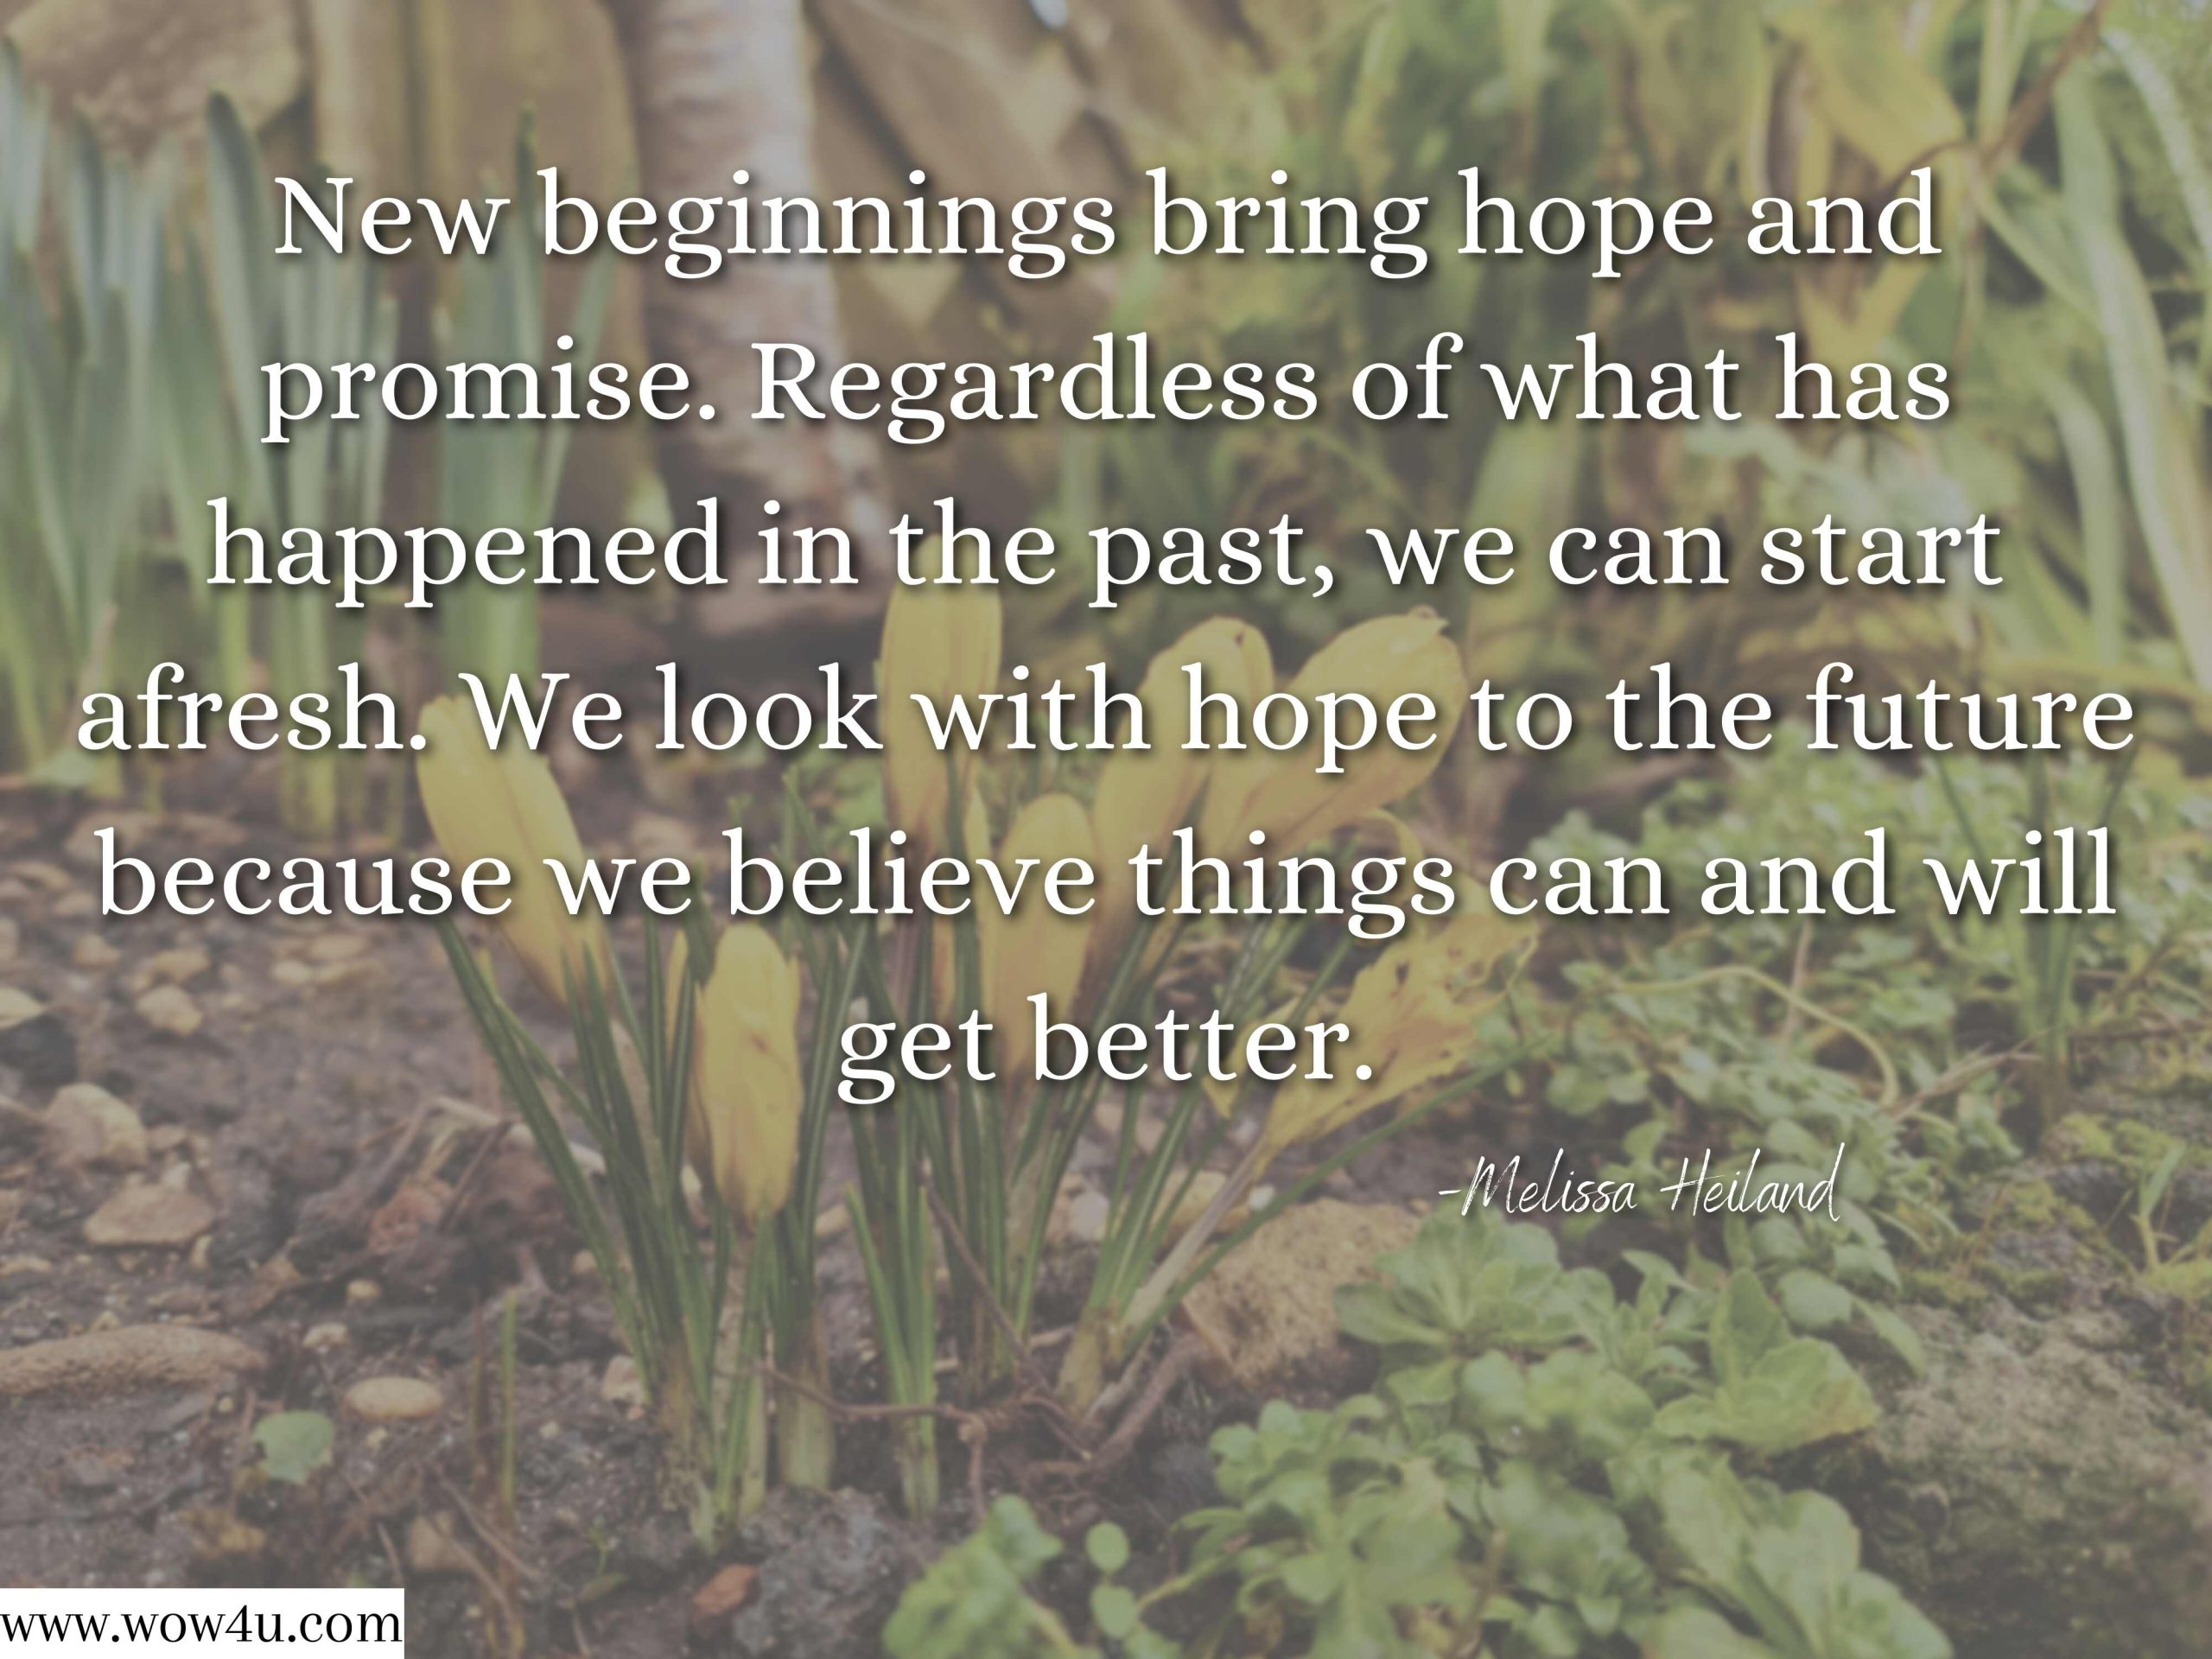 New beginnings bring hope and promise. Regardless of what has happened in the past, we can start afresh. We look with hope to the future because we believe things can and will get better. Melissa Heiland , A Mother's Journey: A Devotional for Pregnancy 